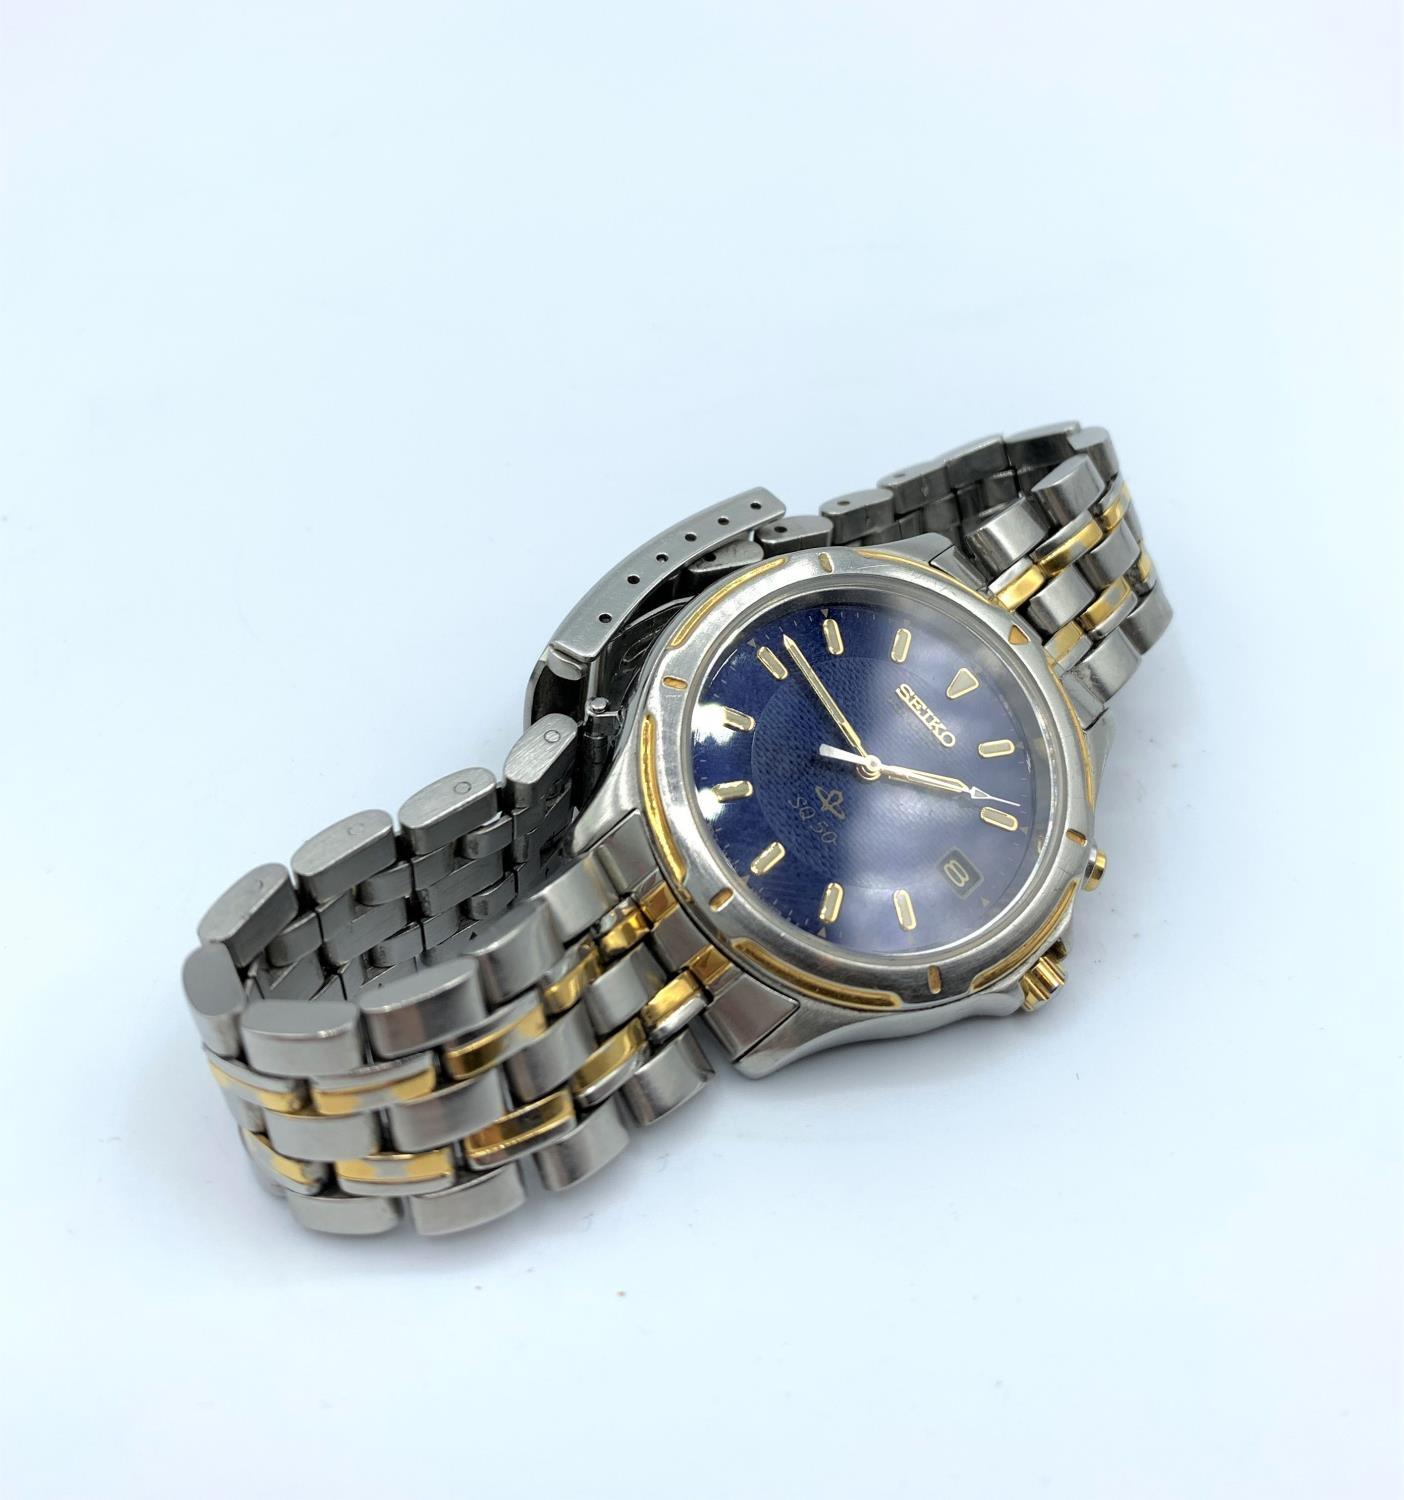 Seiko Perpetual Motion Gentlemen's Wristwatch With A Blue Face And a Metal Strap - Image 2 of 10